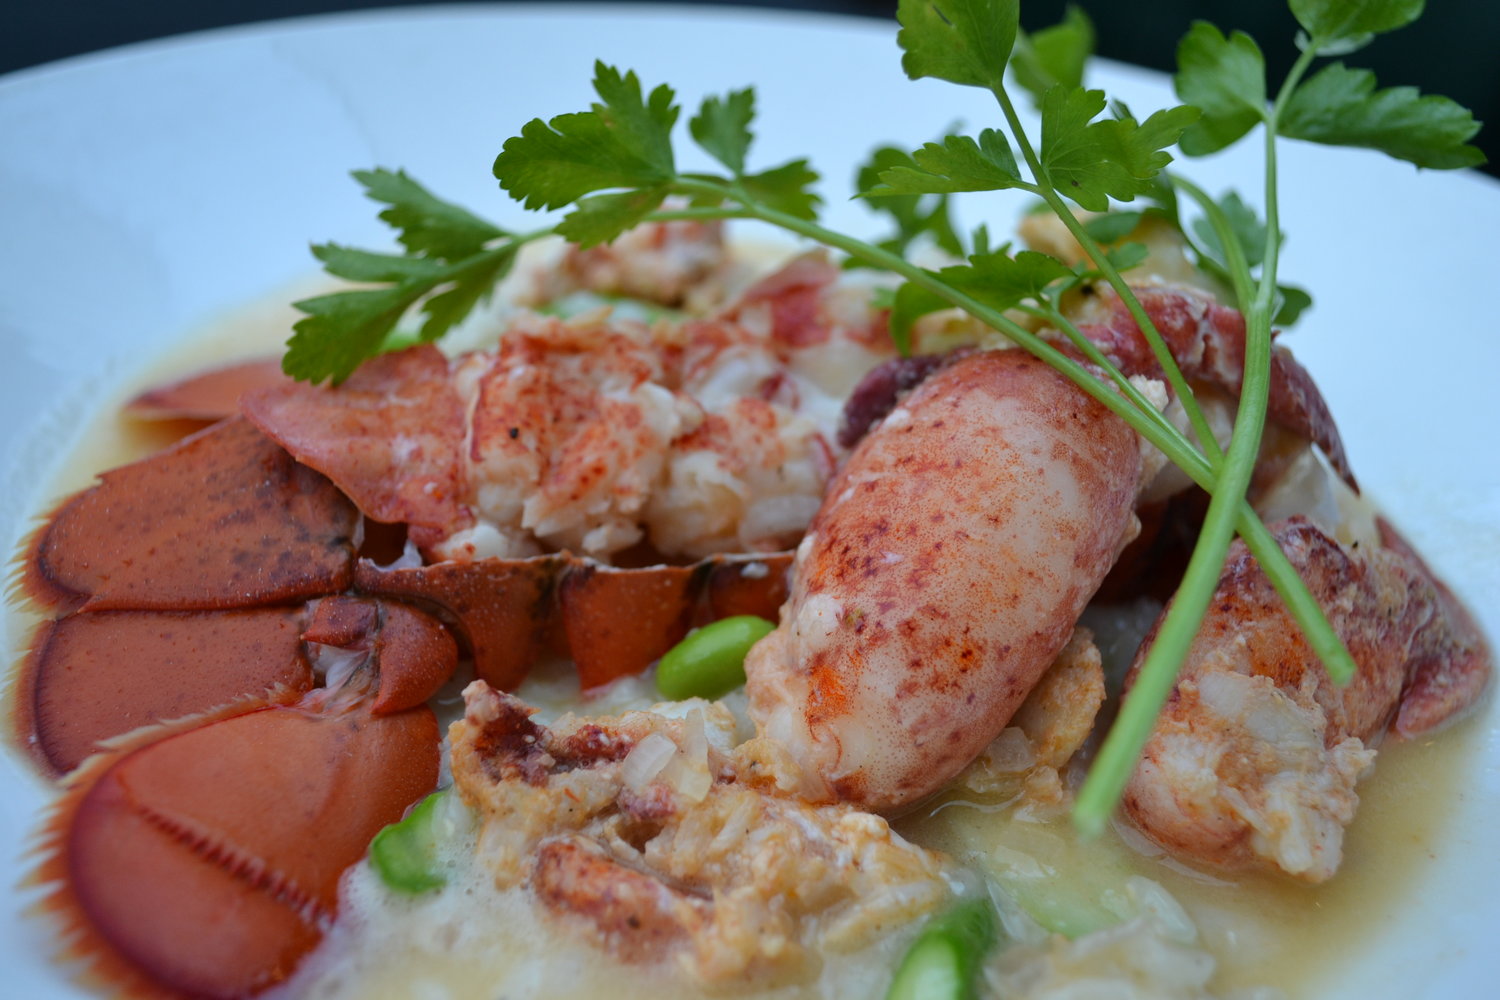 FEATURE: SEAFOOD RISOTTO